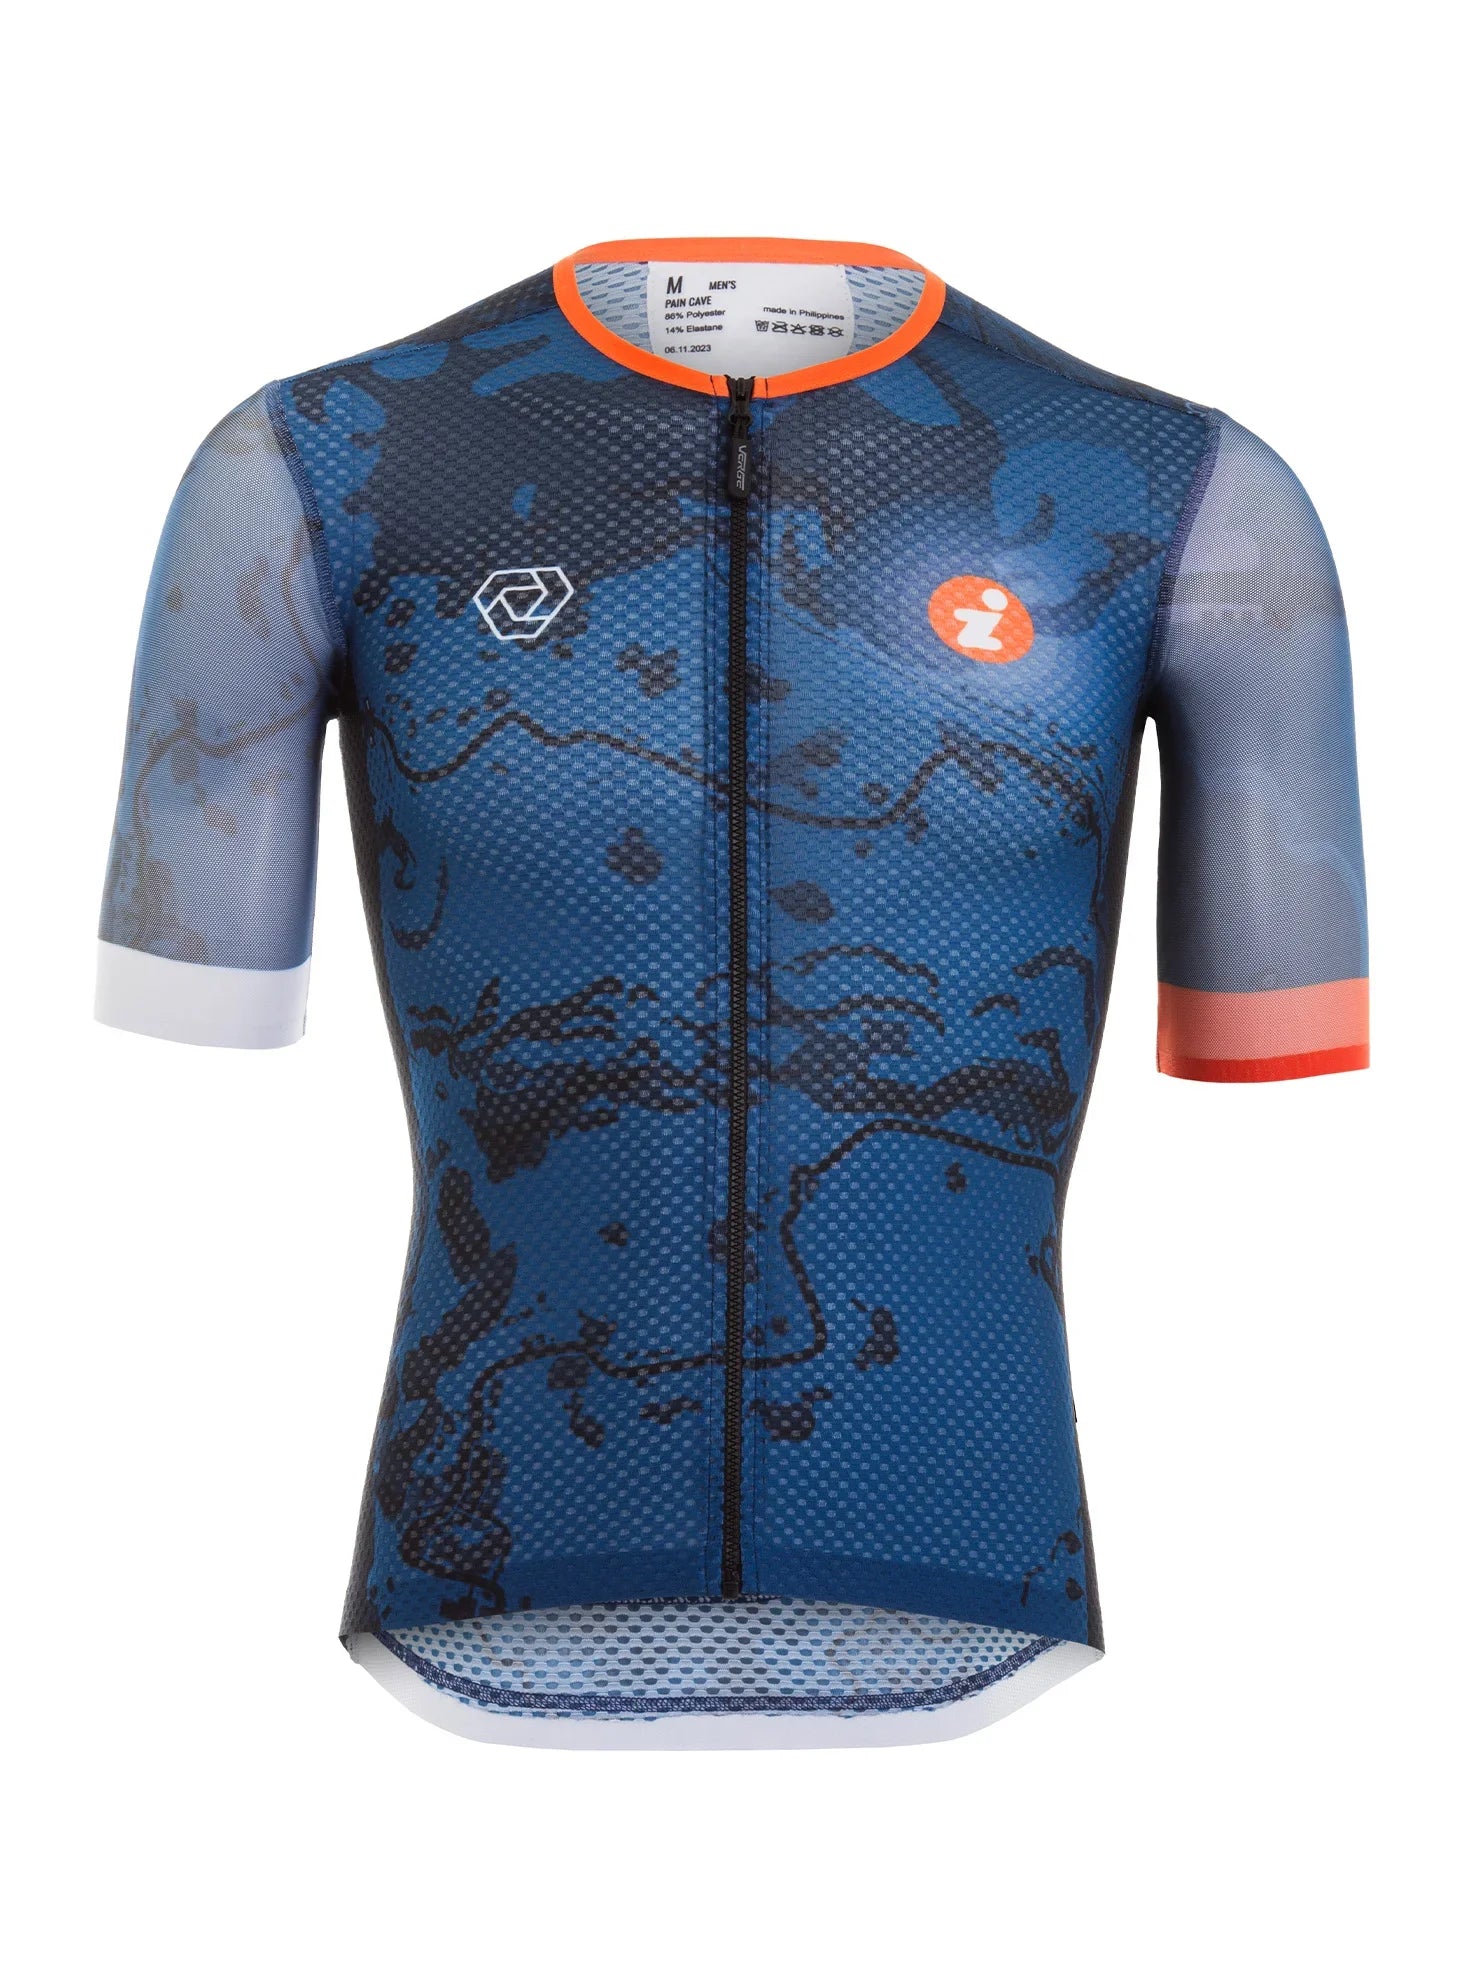 Pain Cave Jersey - VERGE SPORT GLOBAL